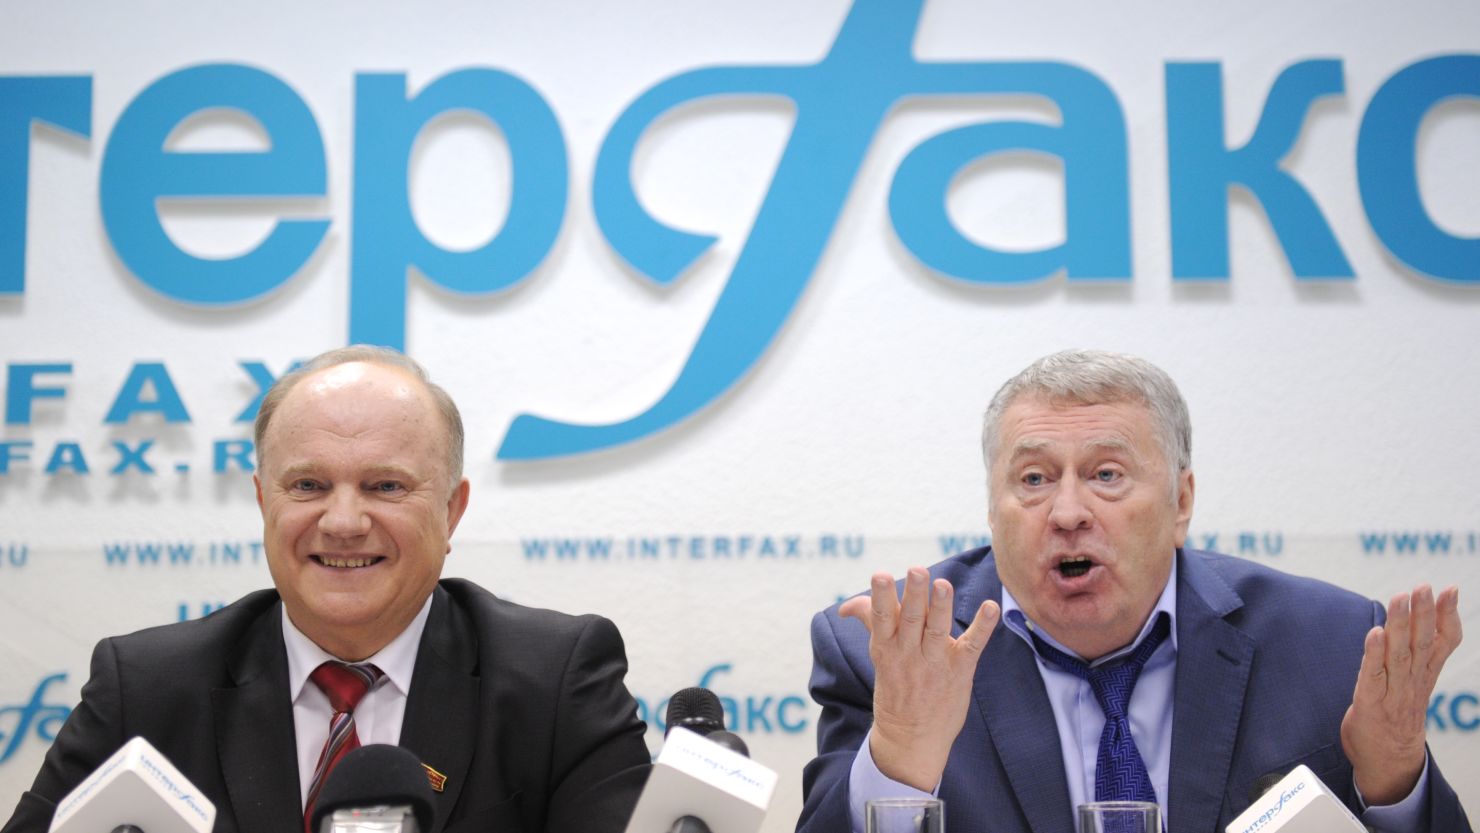 Presidential candidates Gennady Zyuganov (left) and Vladimir Zhirinovsky pictured at a debate in Moscow on Monday.